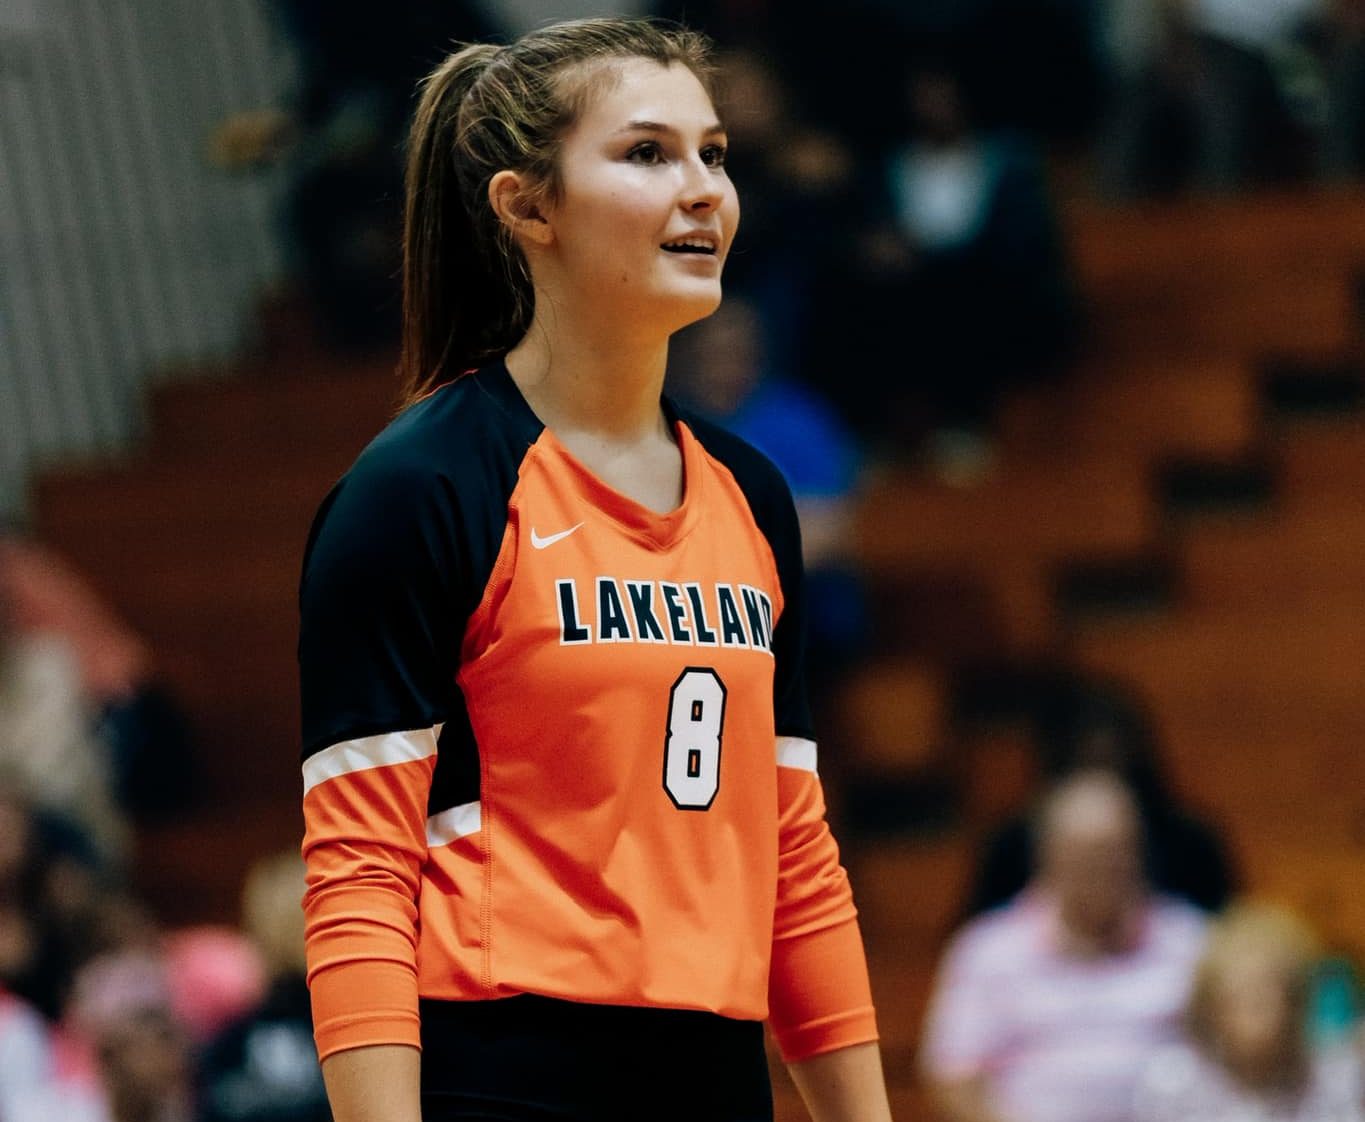 Julia Black Car Accident: Lakeland High School Student and Volleyball ...